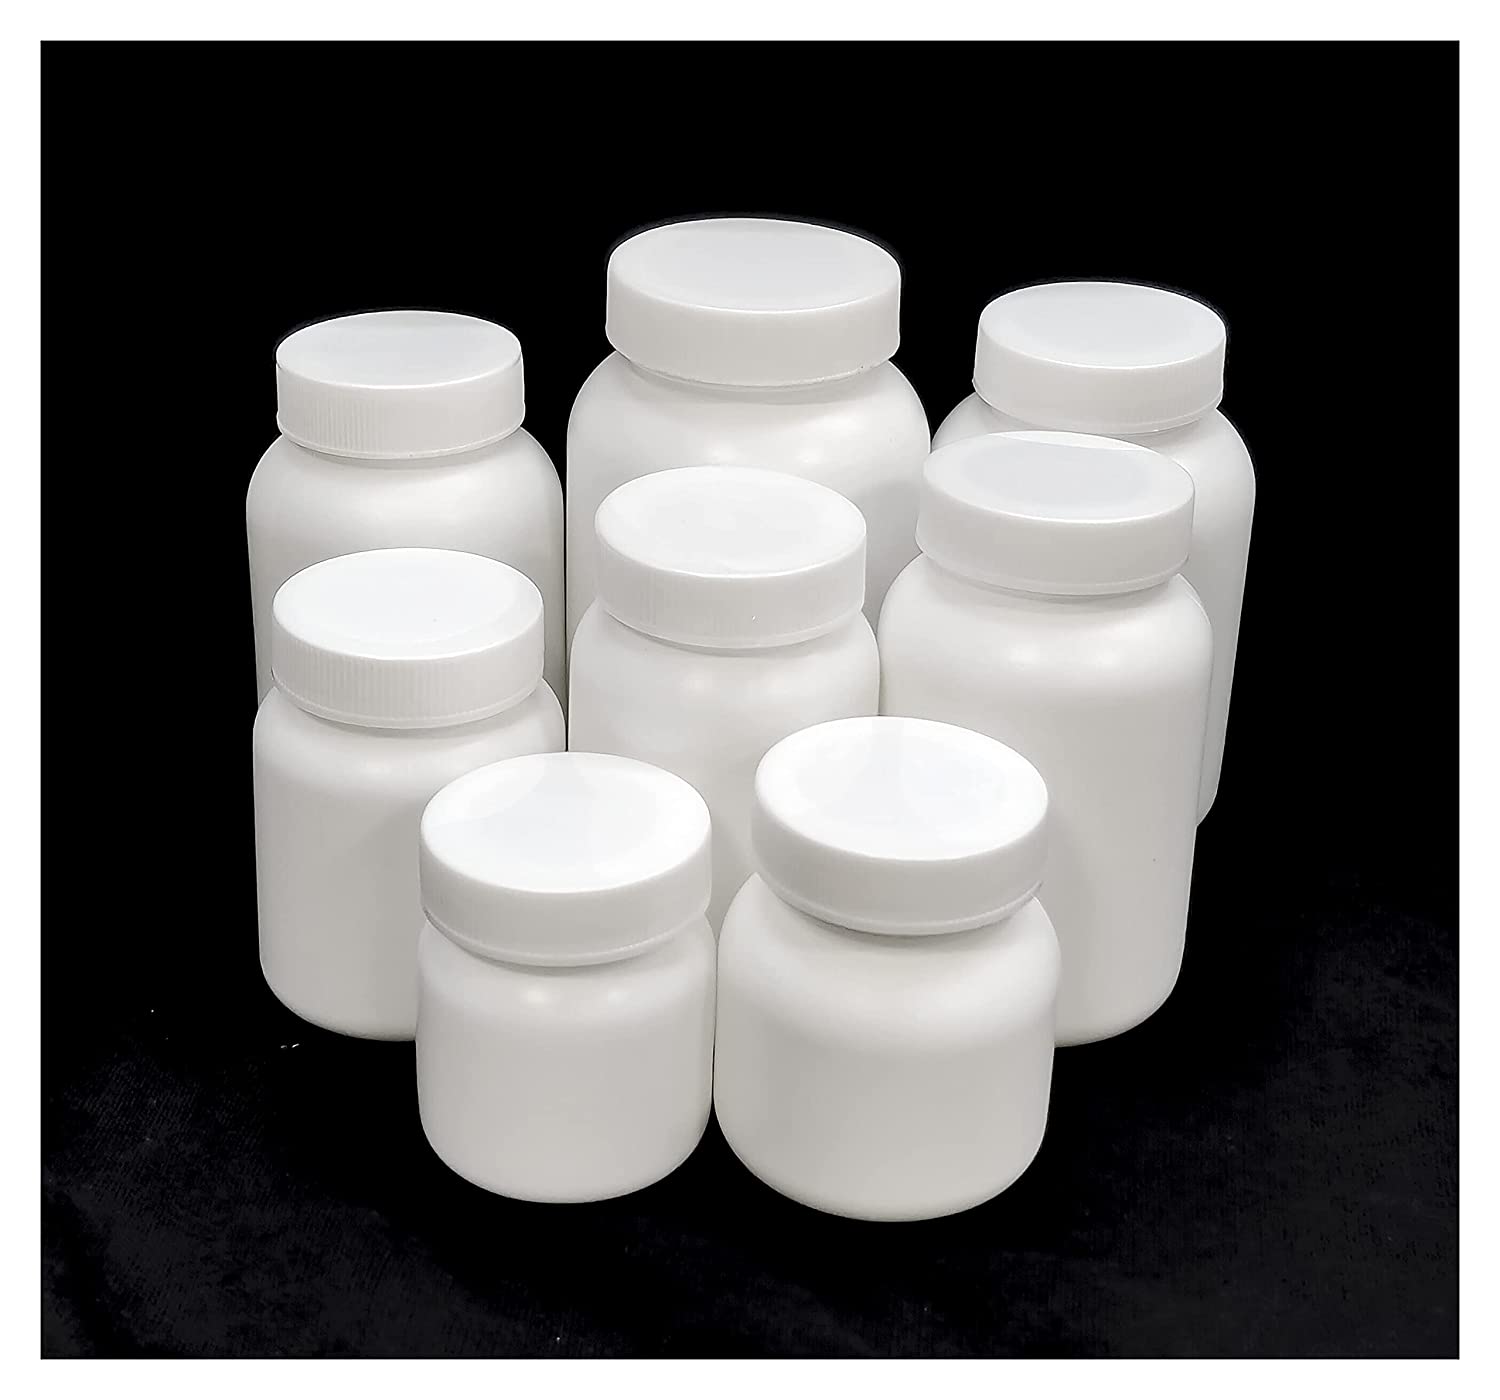 85ml White HDPE Empty Bottle for Secure Storage., Patco Pharma, HPMC capsules, 85ml-white-hdpe-empty-bottle-for-capsules-tablets-for-ayurvedic-powder-storage-bottle-air-tight, 85ml bottle, EMPTY BOTTLE, medicine bottle, Plastic Containers, white container, Patco Pharma